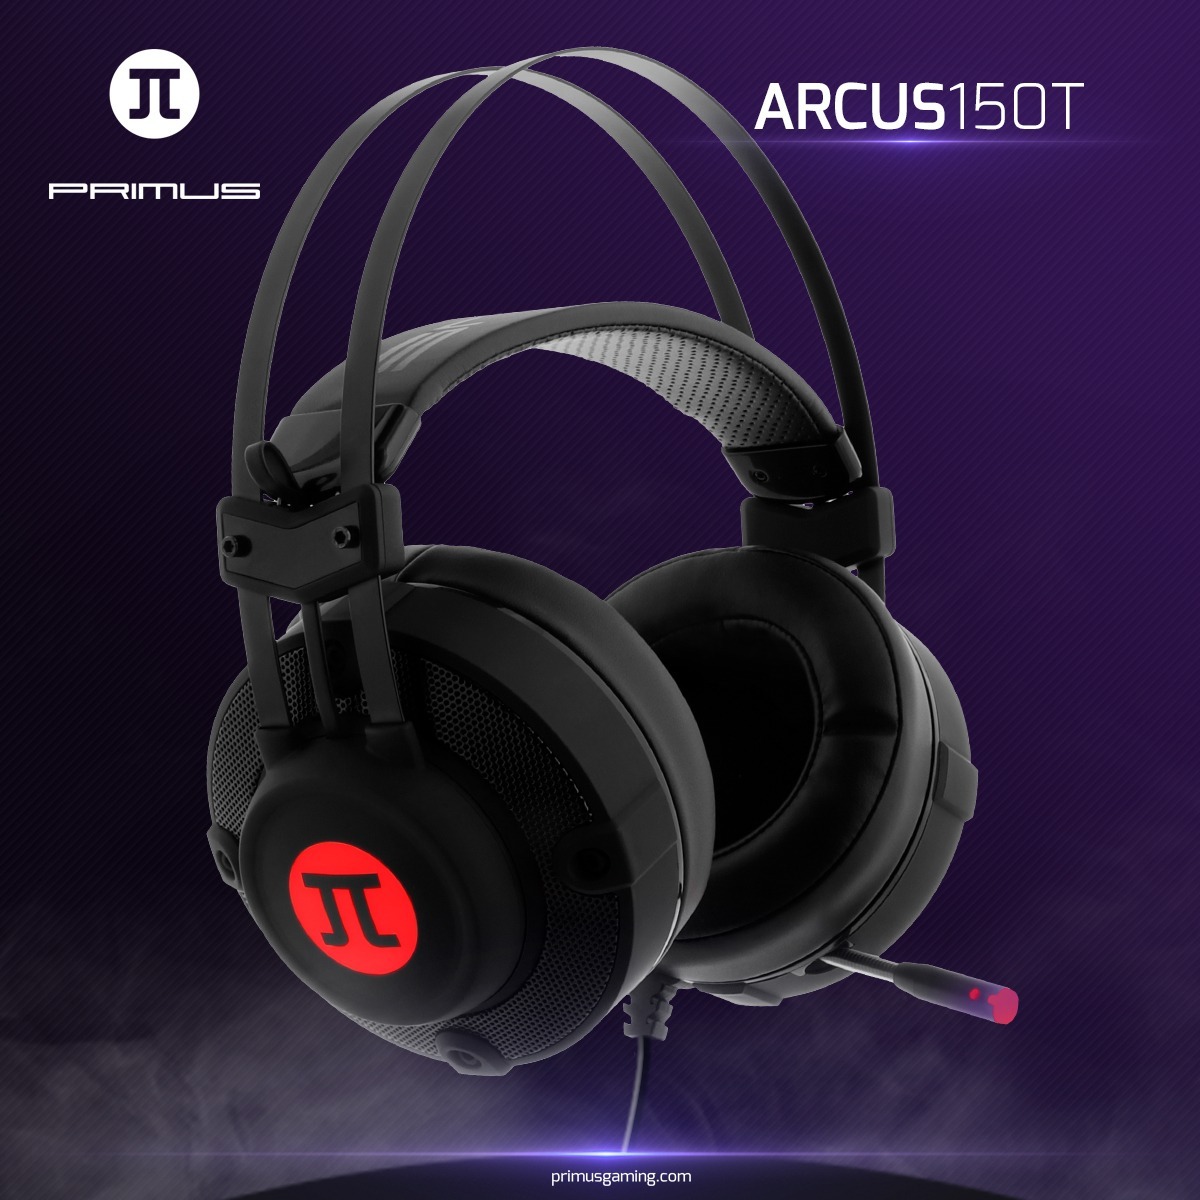 audifono-primus-gaming-arcus-150t-phs-150-D_NQ_NP_774447-MPE31163572927_062019-F